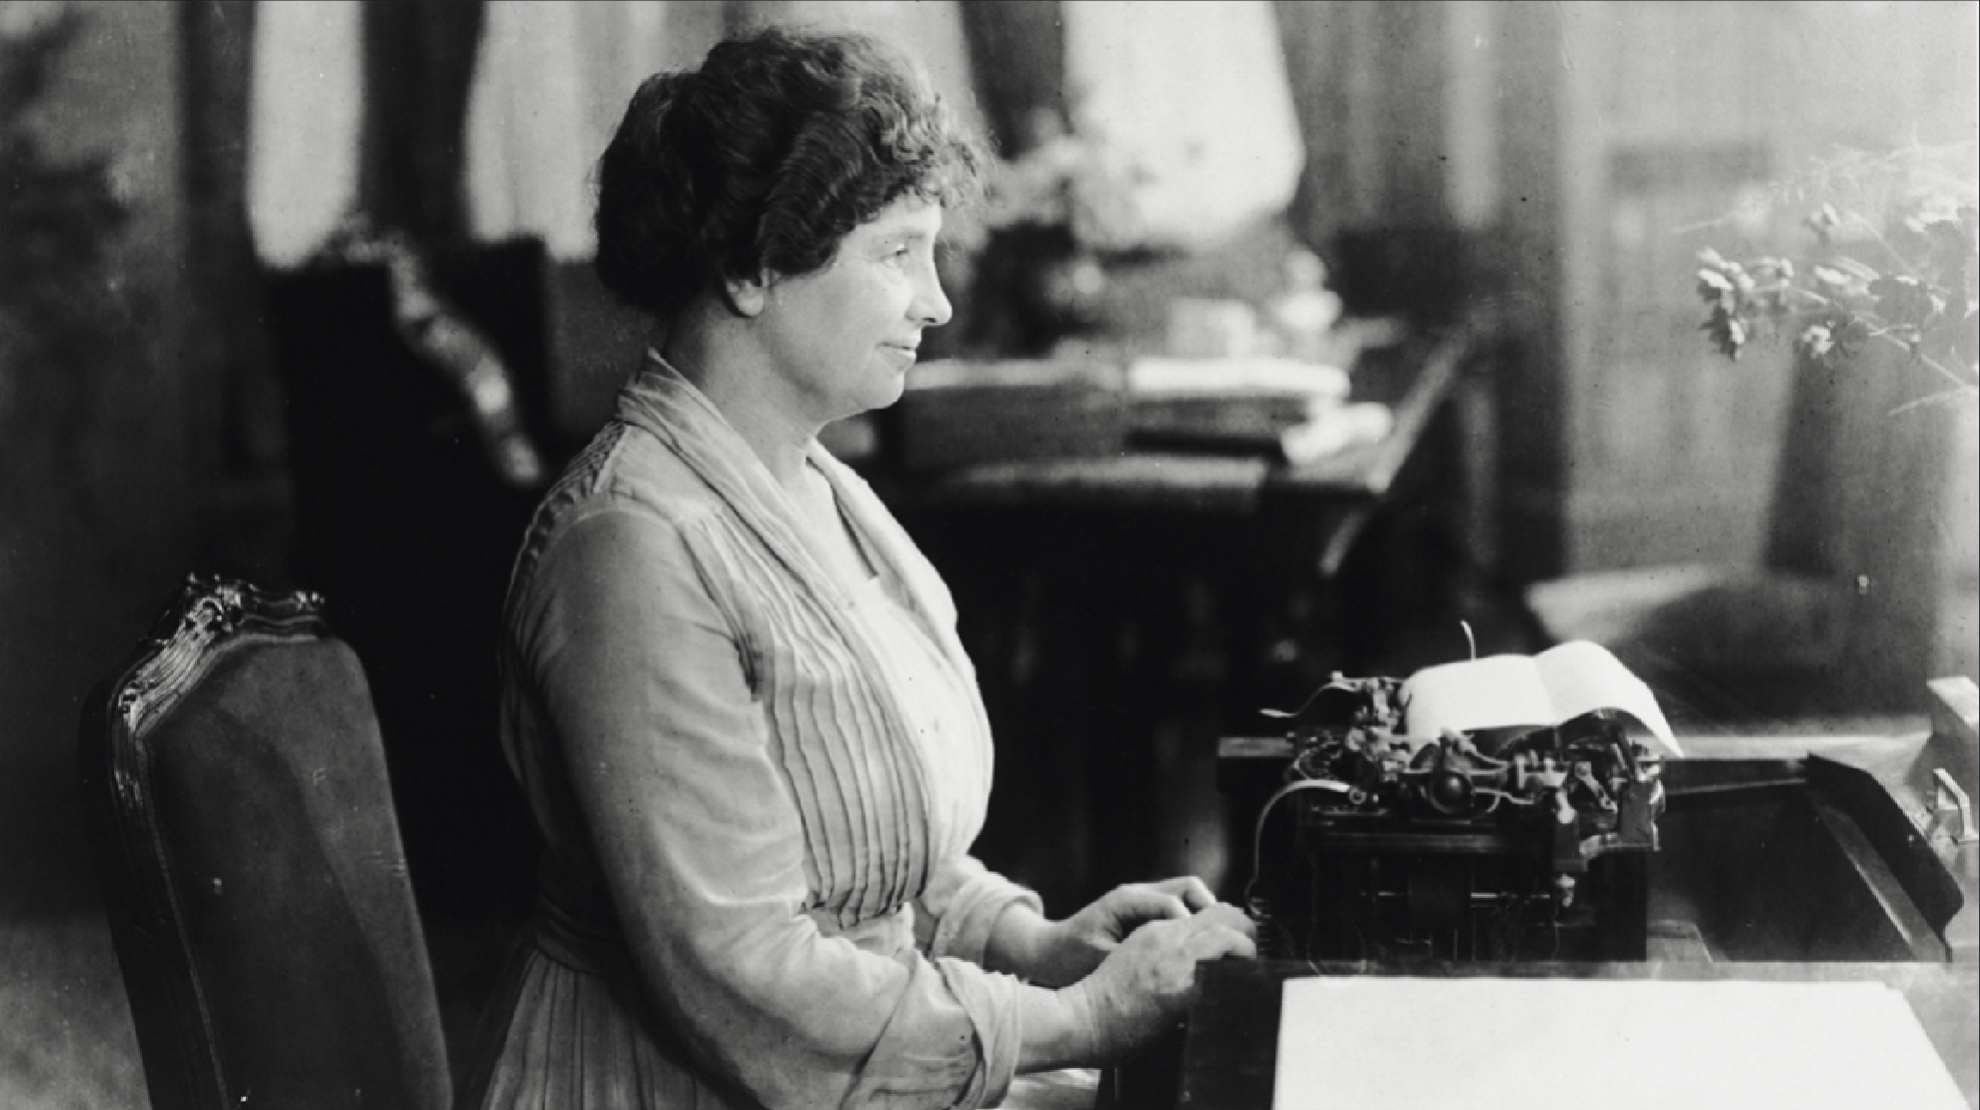 Helen Keller sits at a desk, her fingers poised on the keys of a typewriter. Her hair is piled on top of her head and she wears a light-colored dress with pleating down the front.